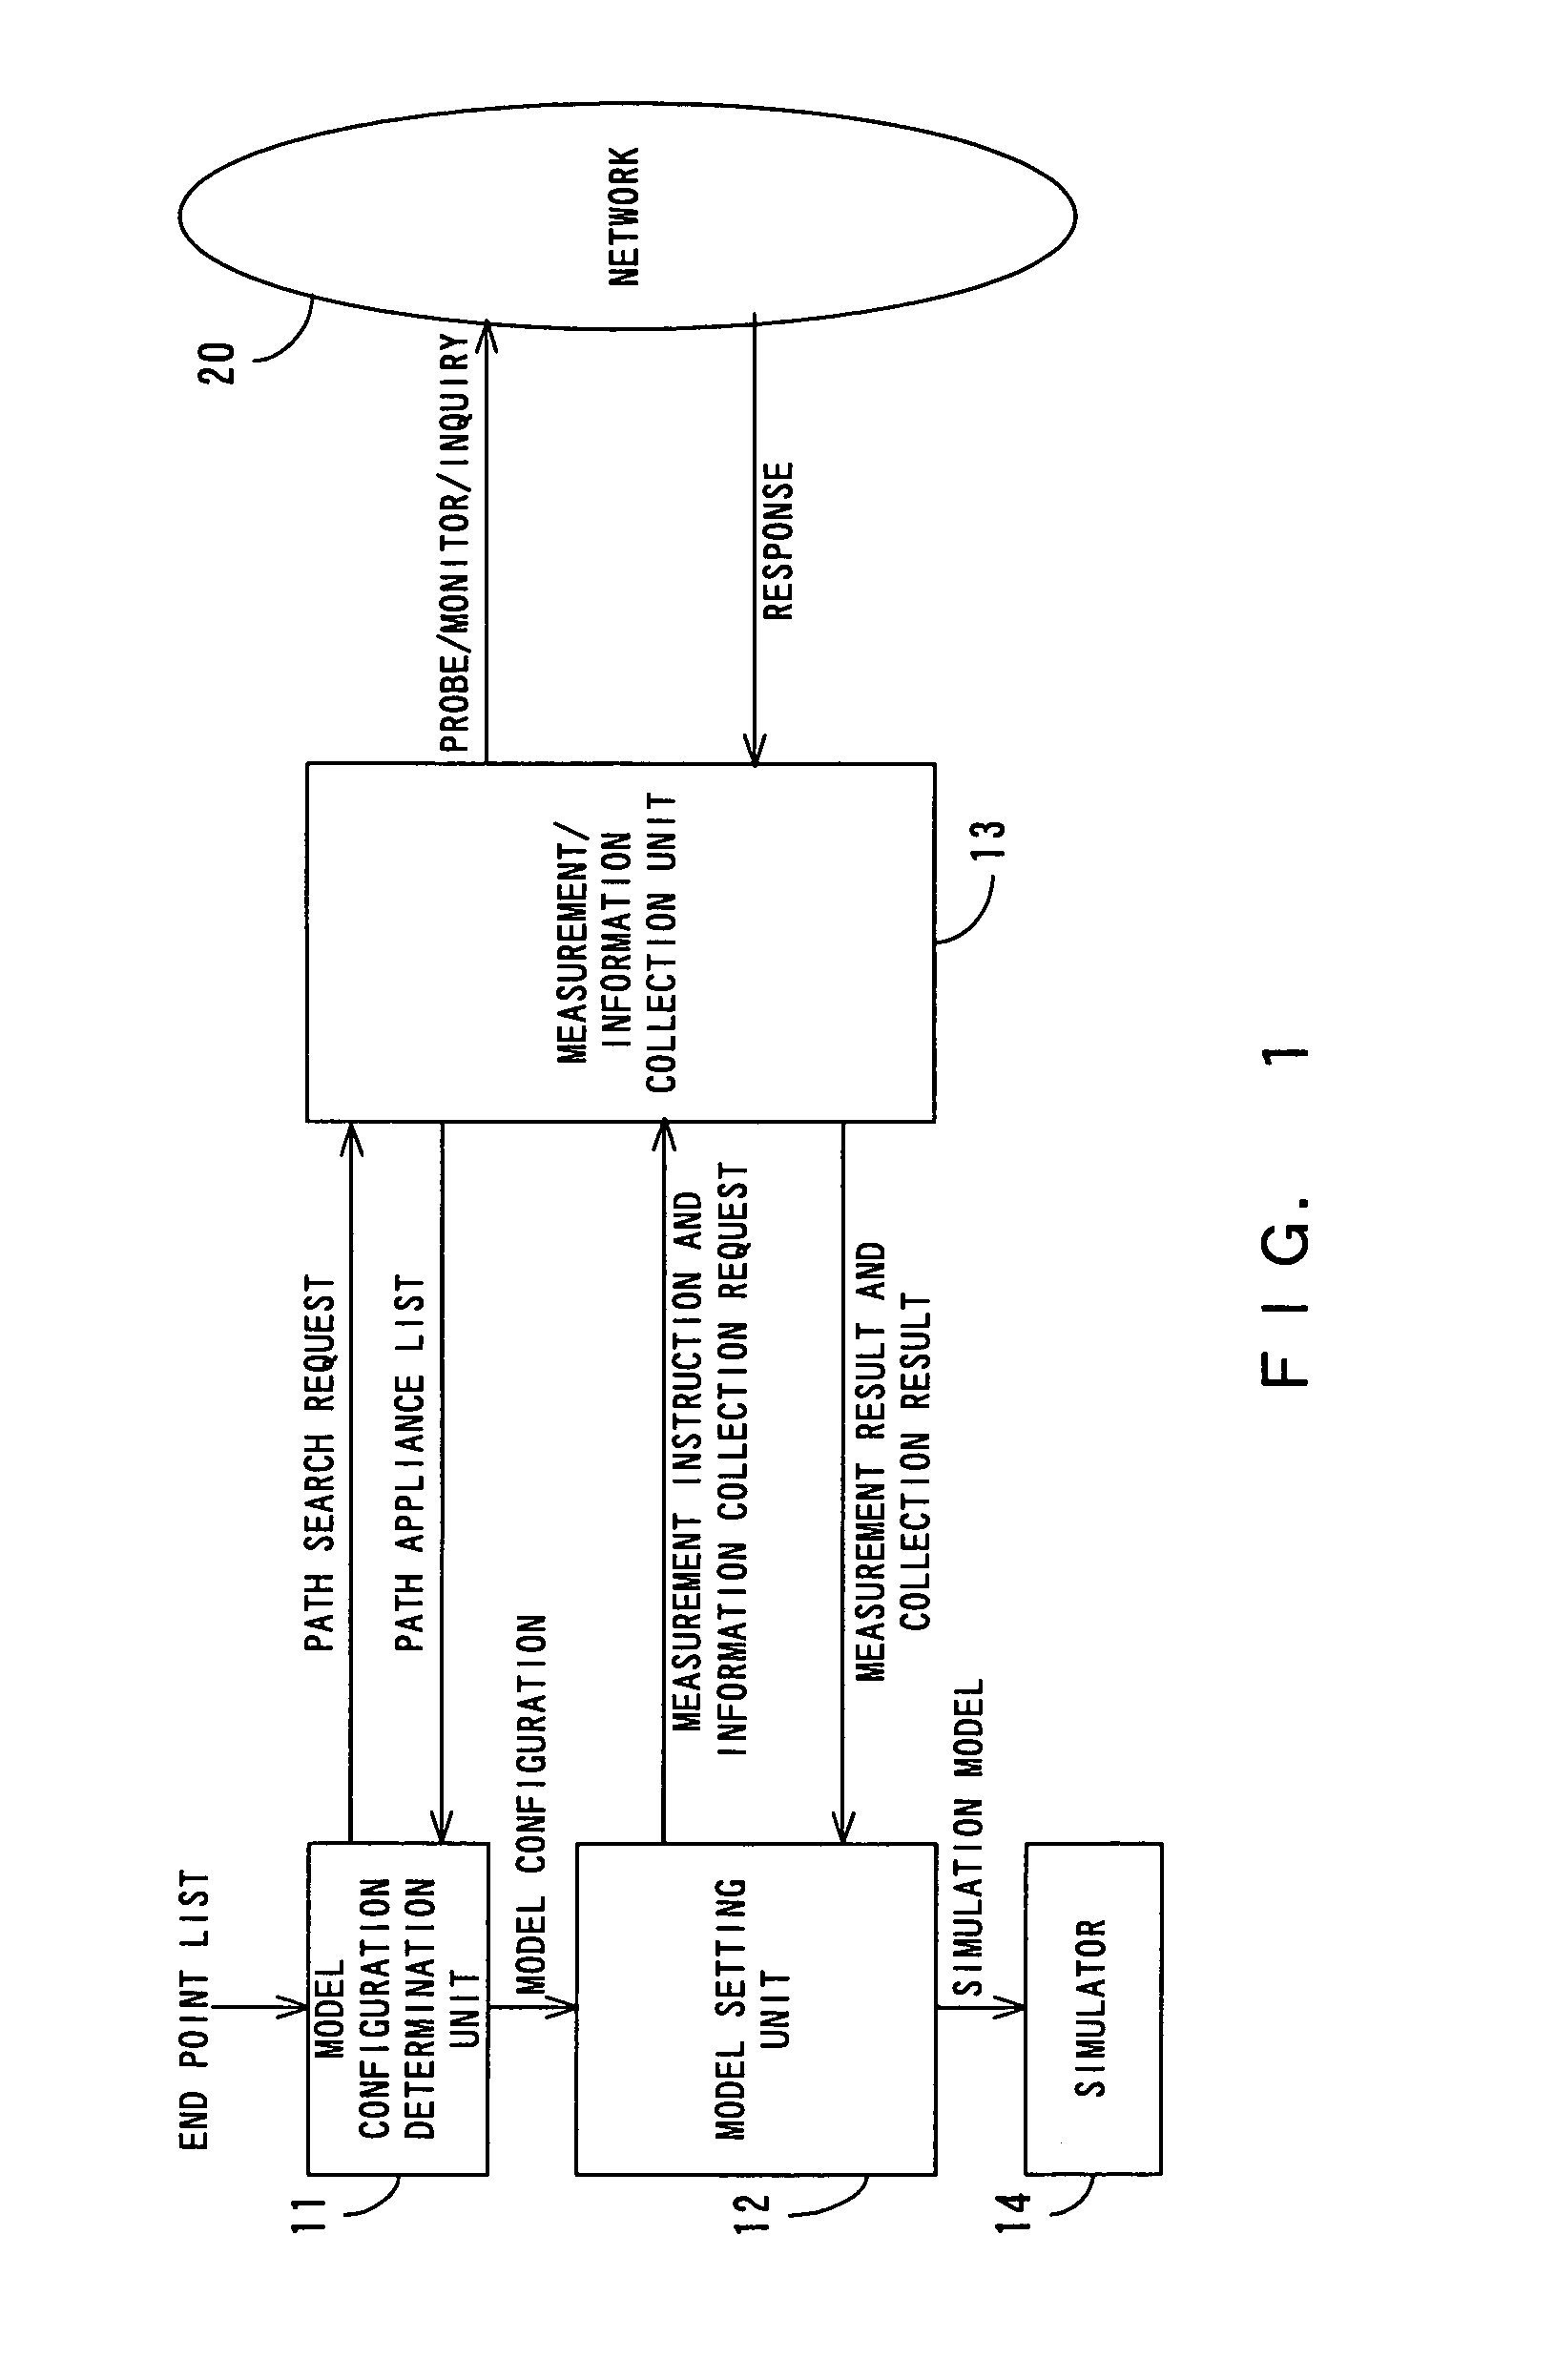 Apparatus and method of generating network simulation model, and storage medium storing program for realizing the method